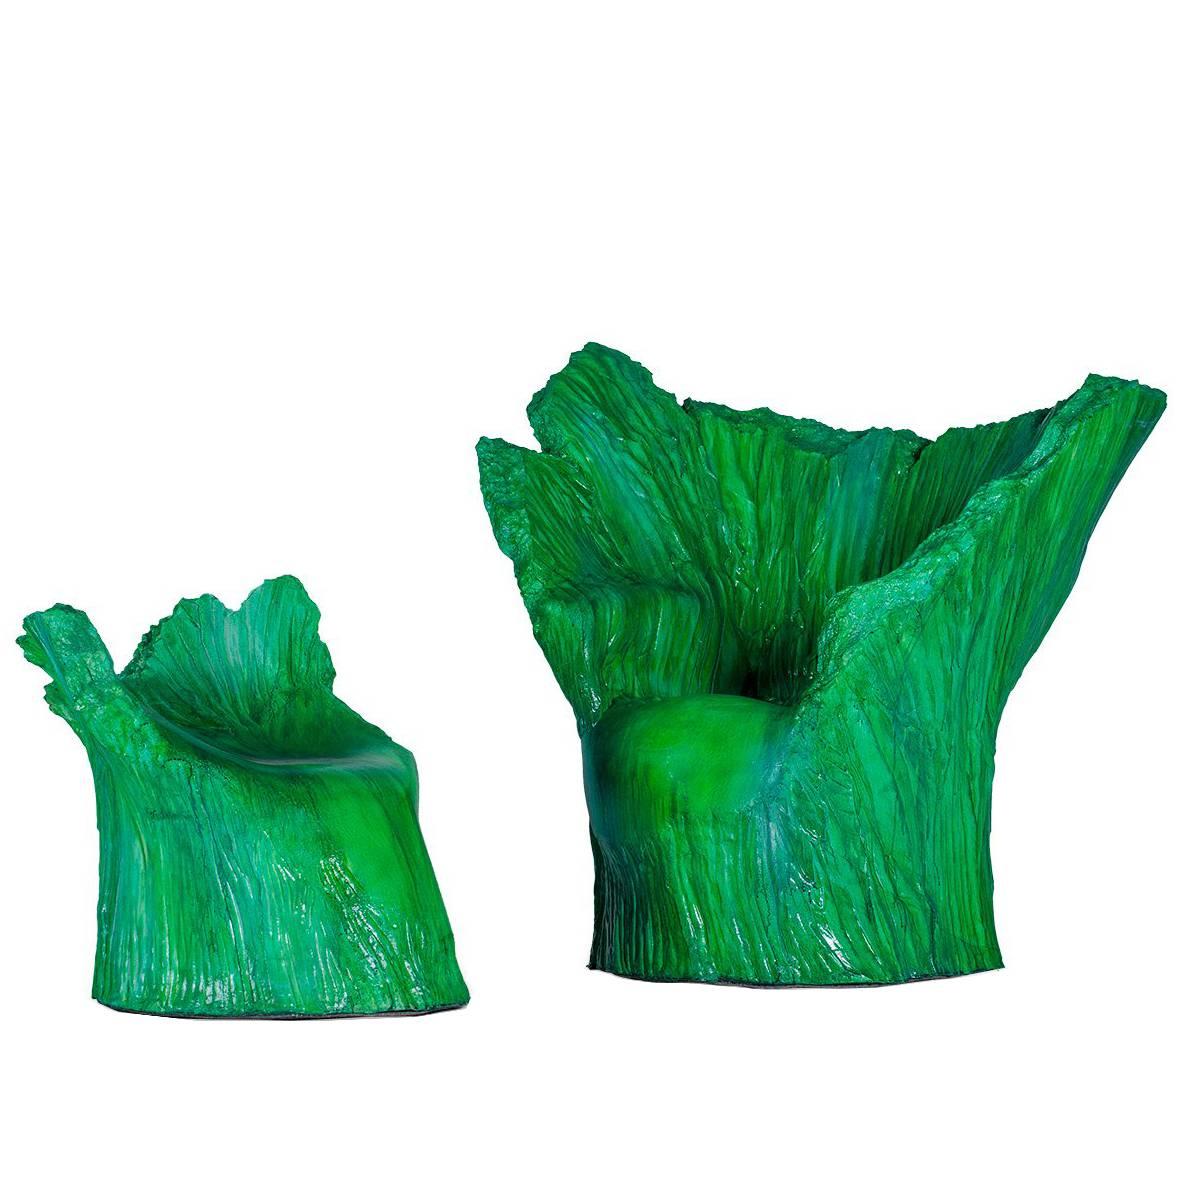 Armchair "Green" and Pouf Hand-Carved Polyurethane Body Numbered from 1 to 30 For Sale